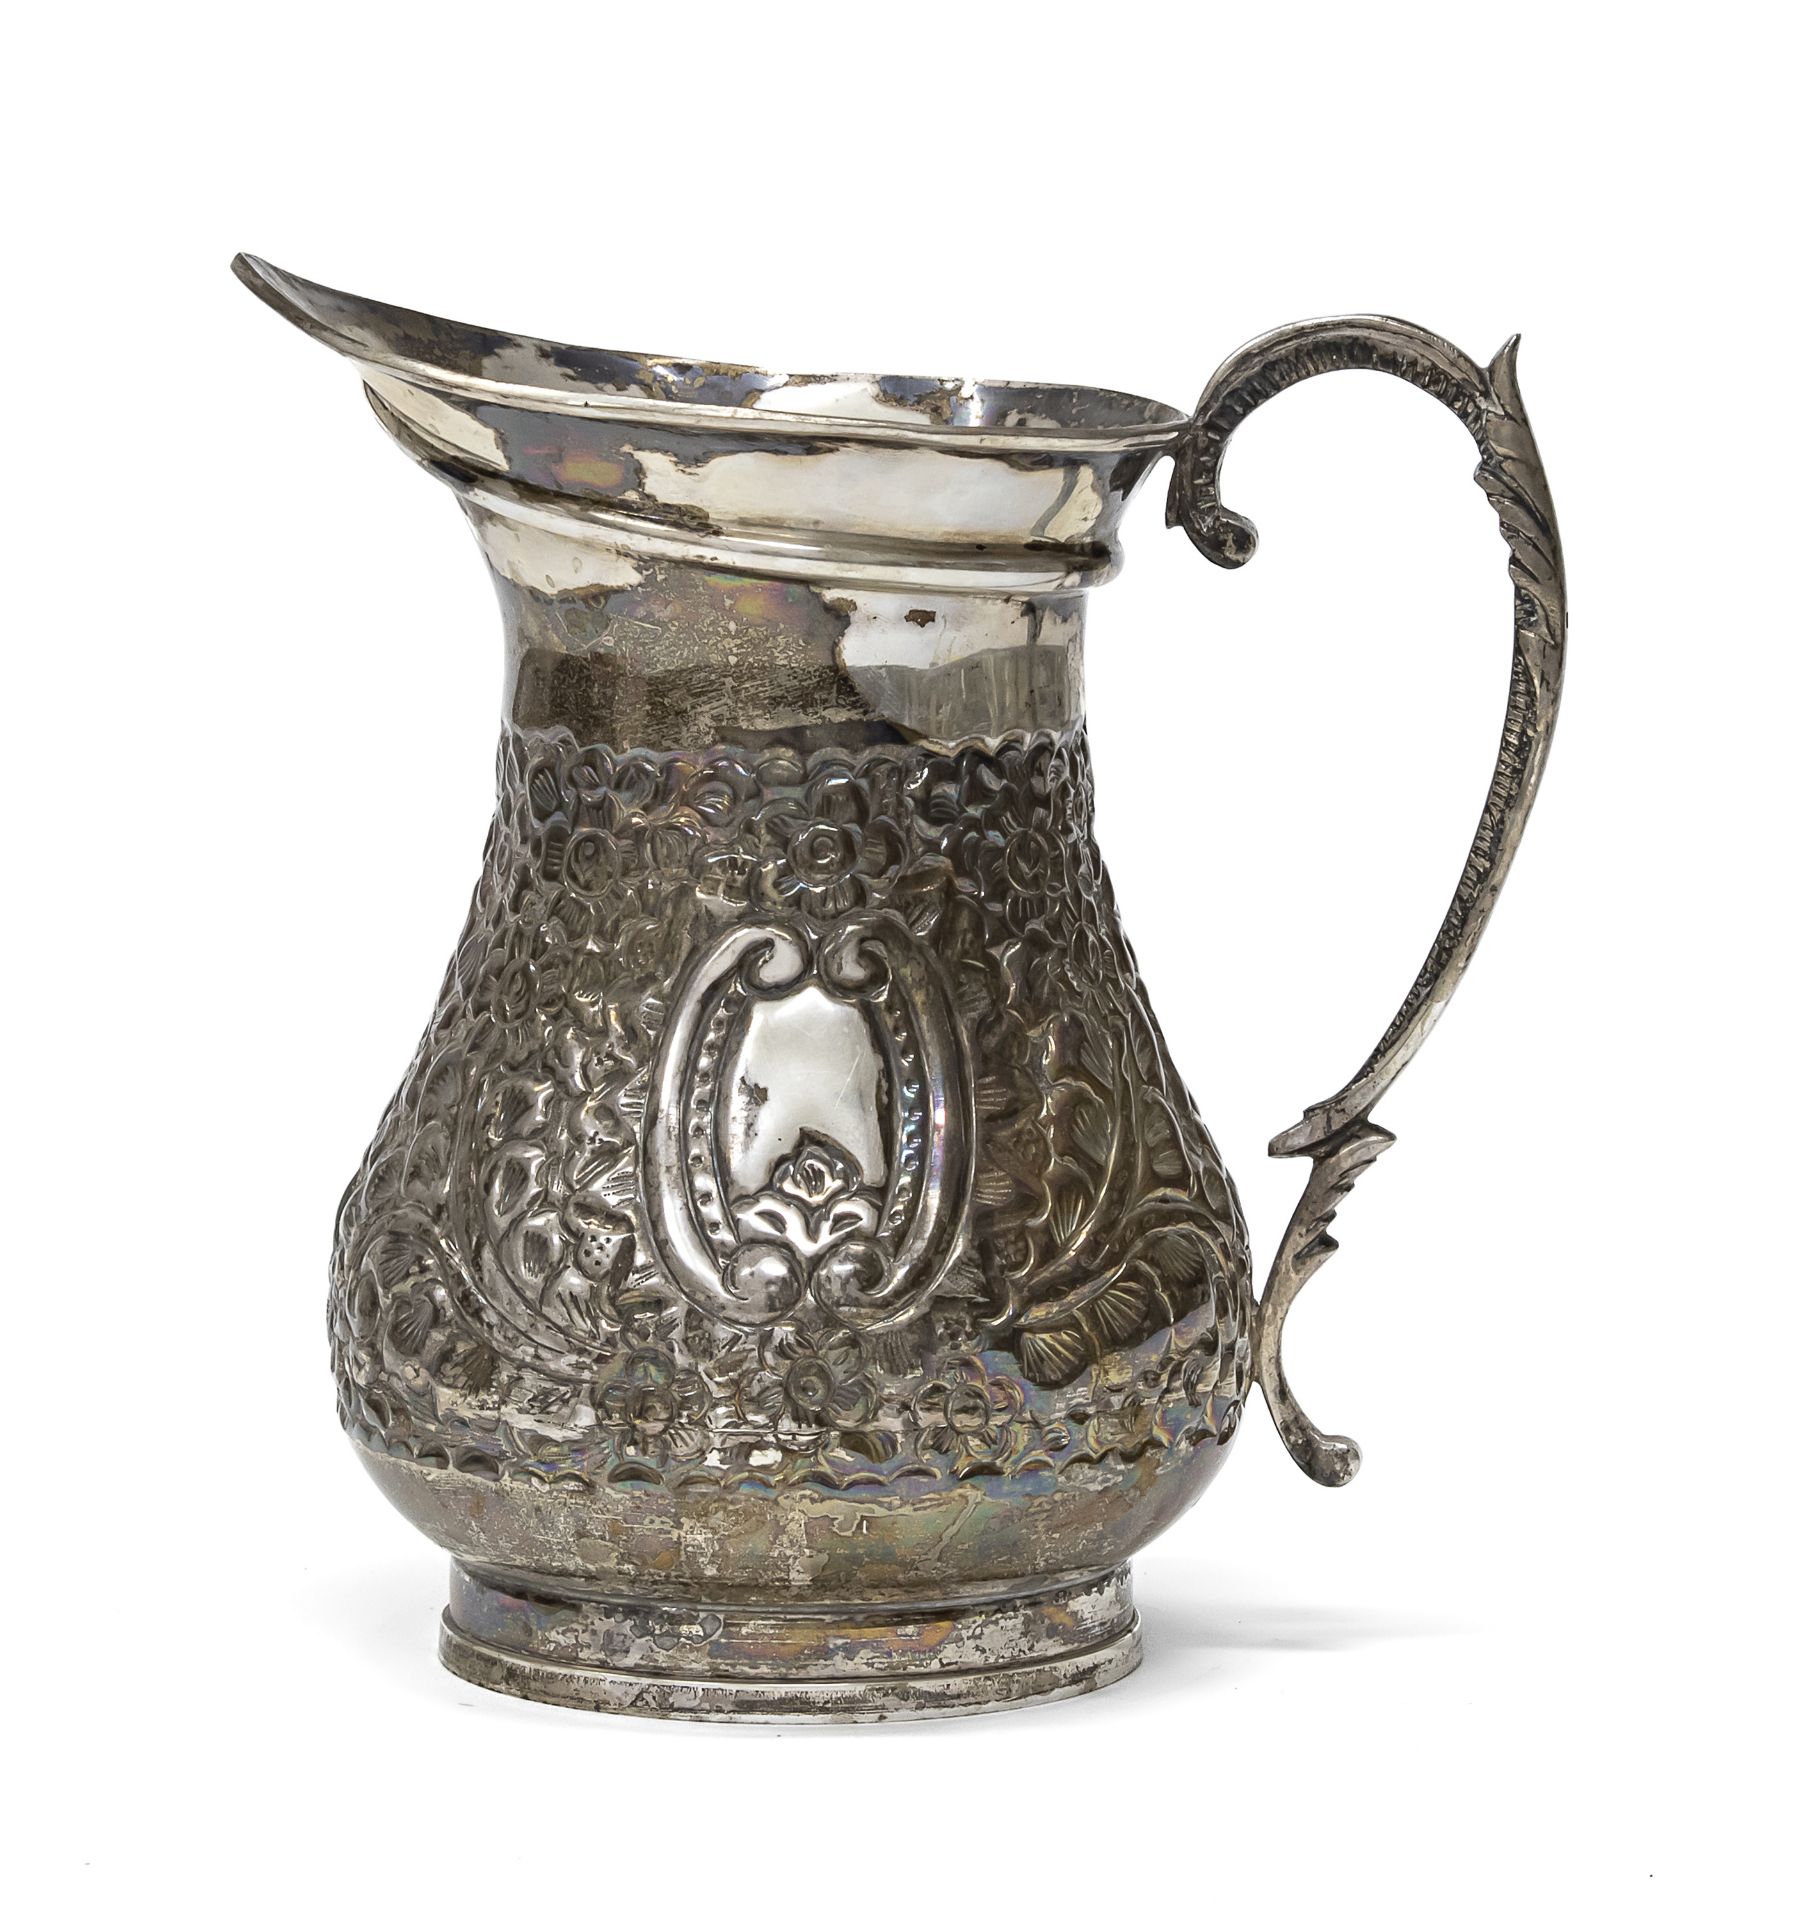 SILVER JUG EGYPT EARLY 20TH CENTURY